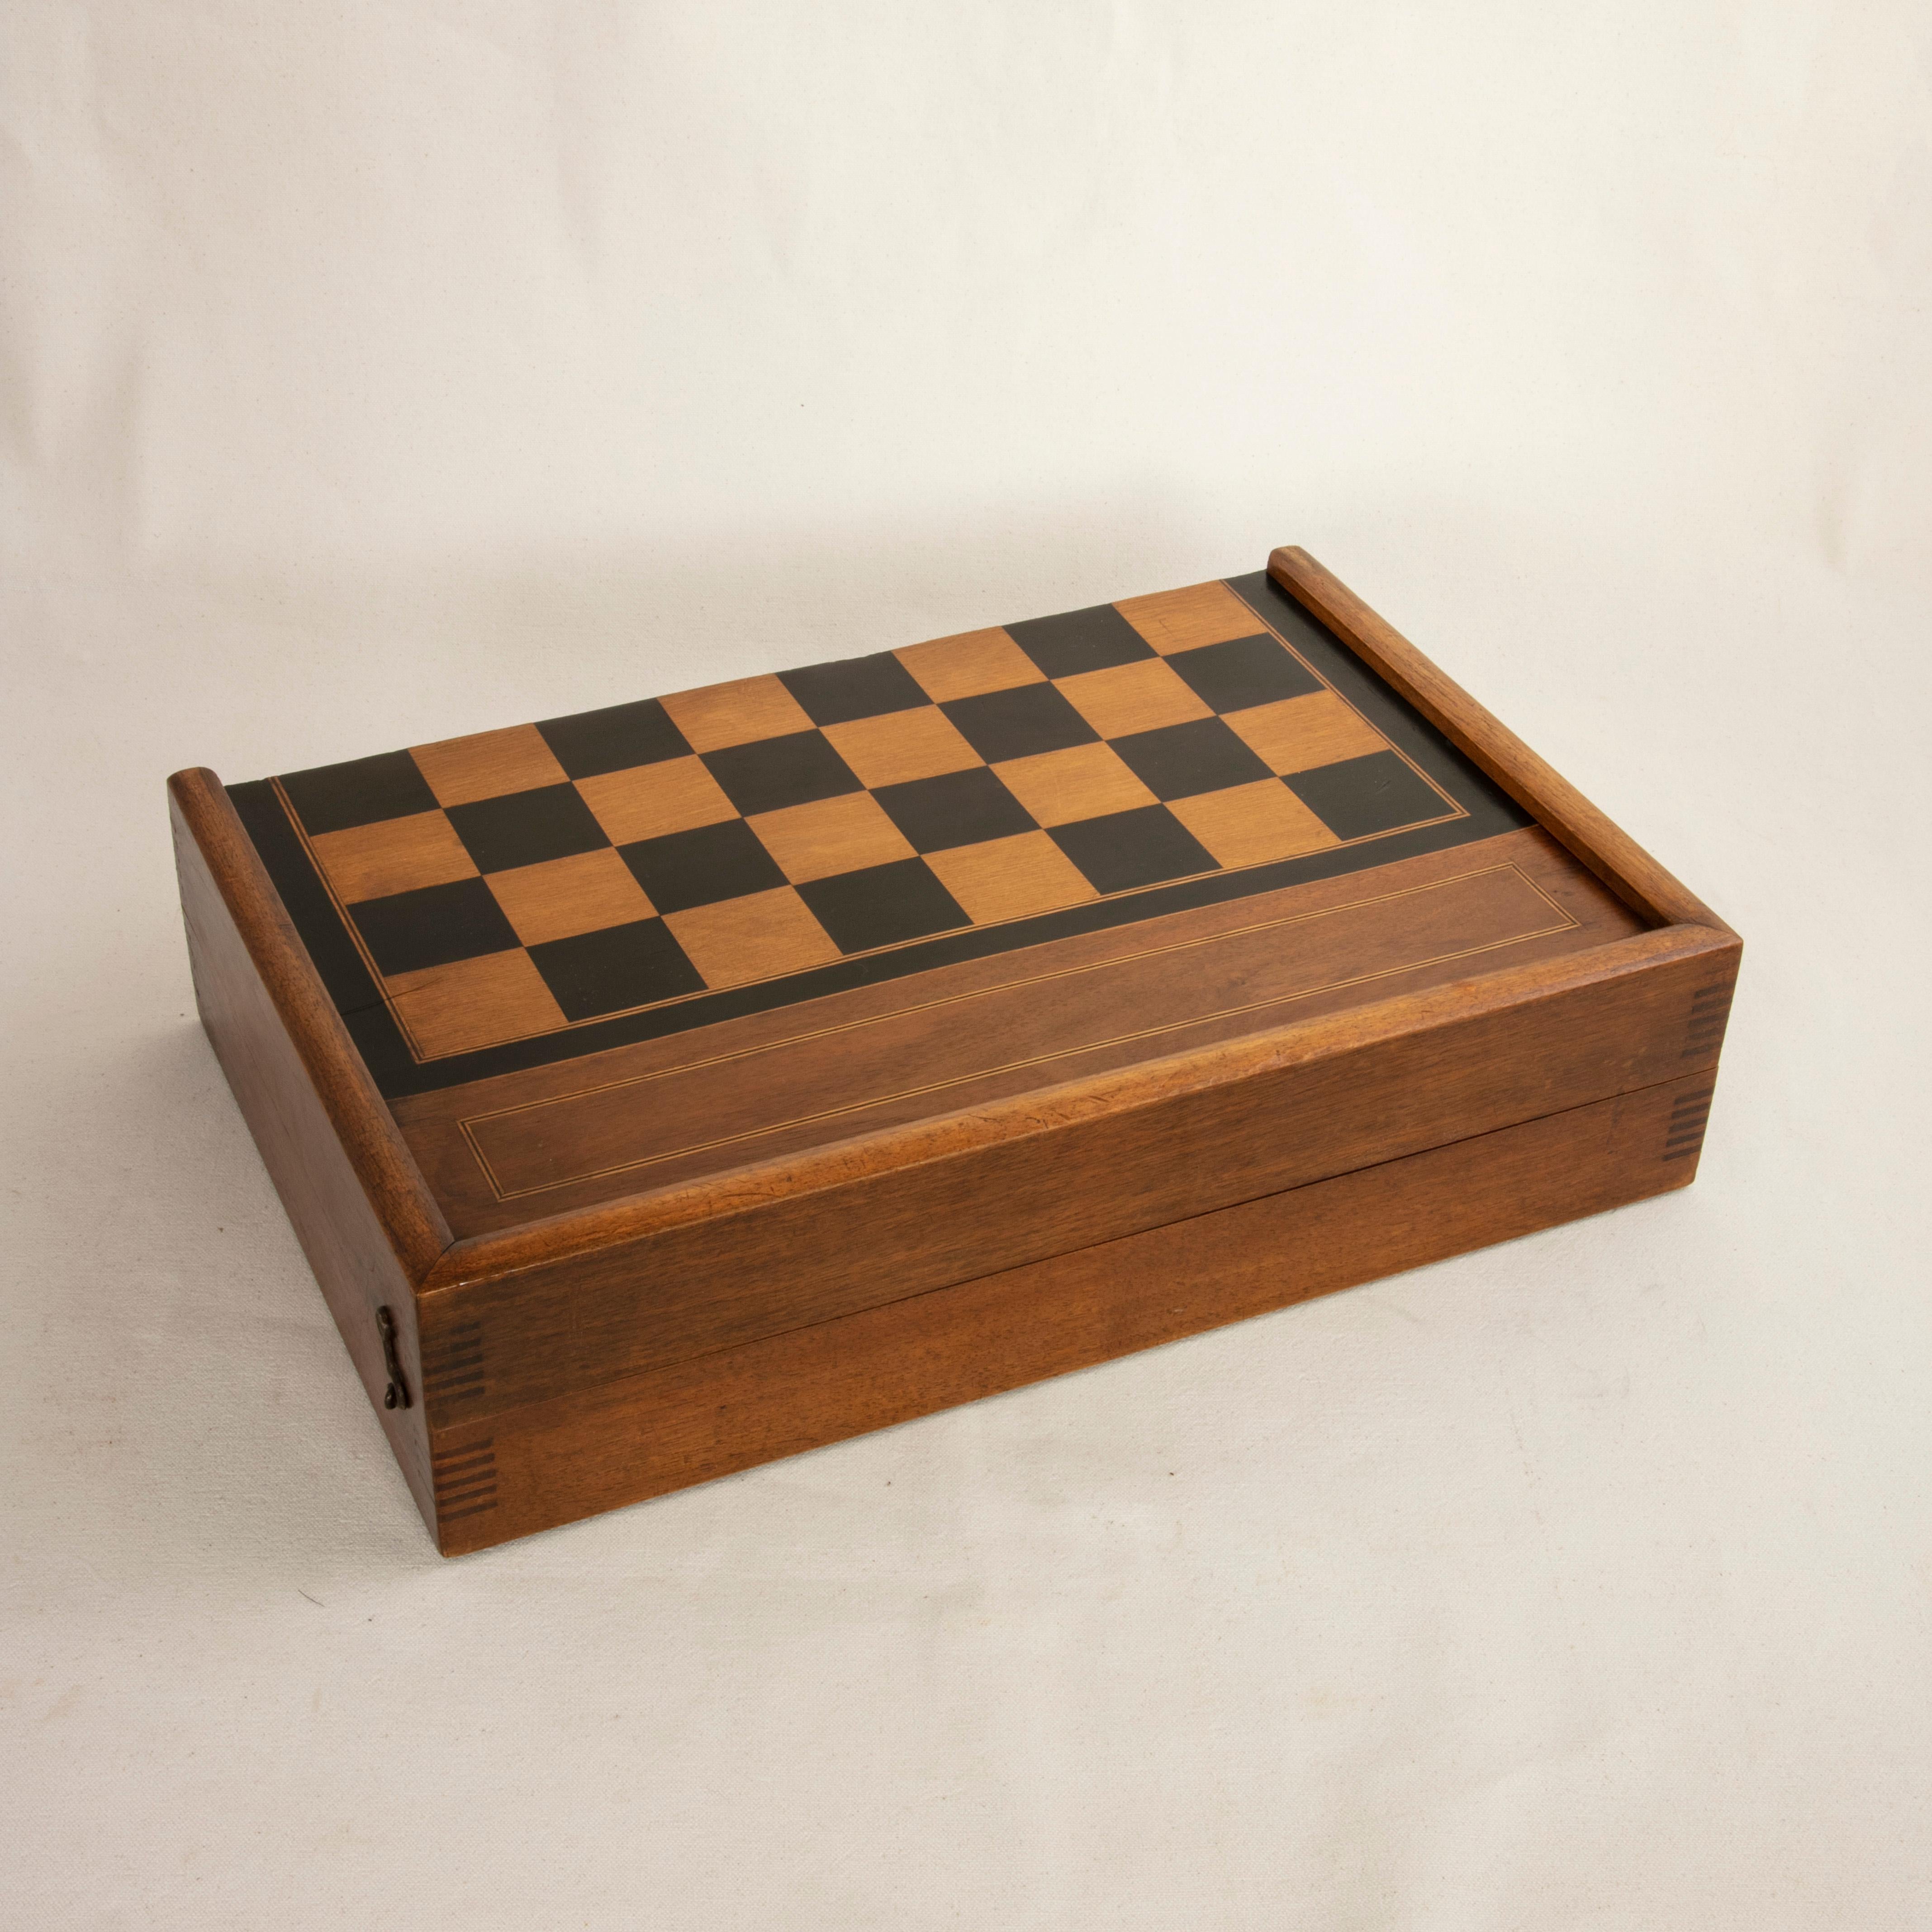 French Walnut Marquetry Folding Game Box, with Chess, Checkers, Backgammon, circa 1900